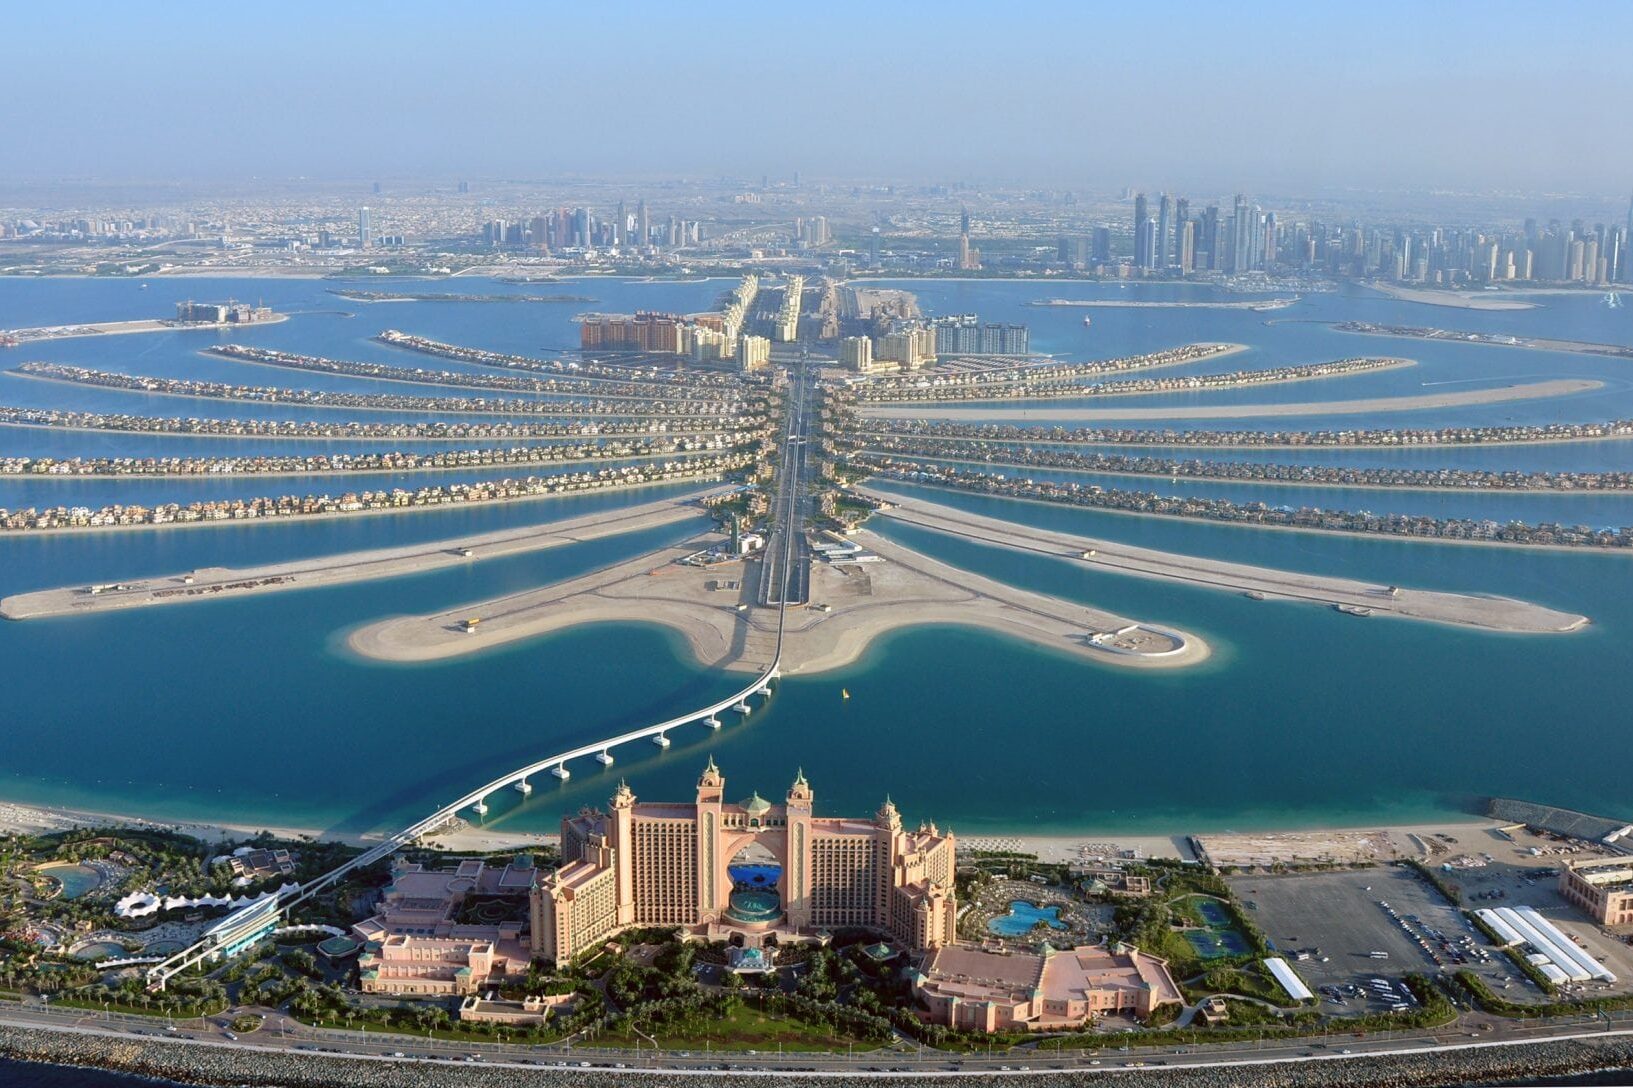 Aerial view of Atlantis hotel seen with the existing Palm Jumeirah island in Dubai.